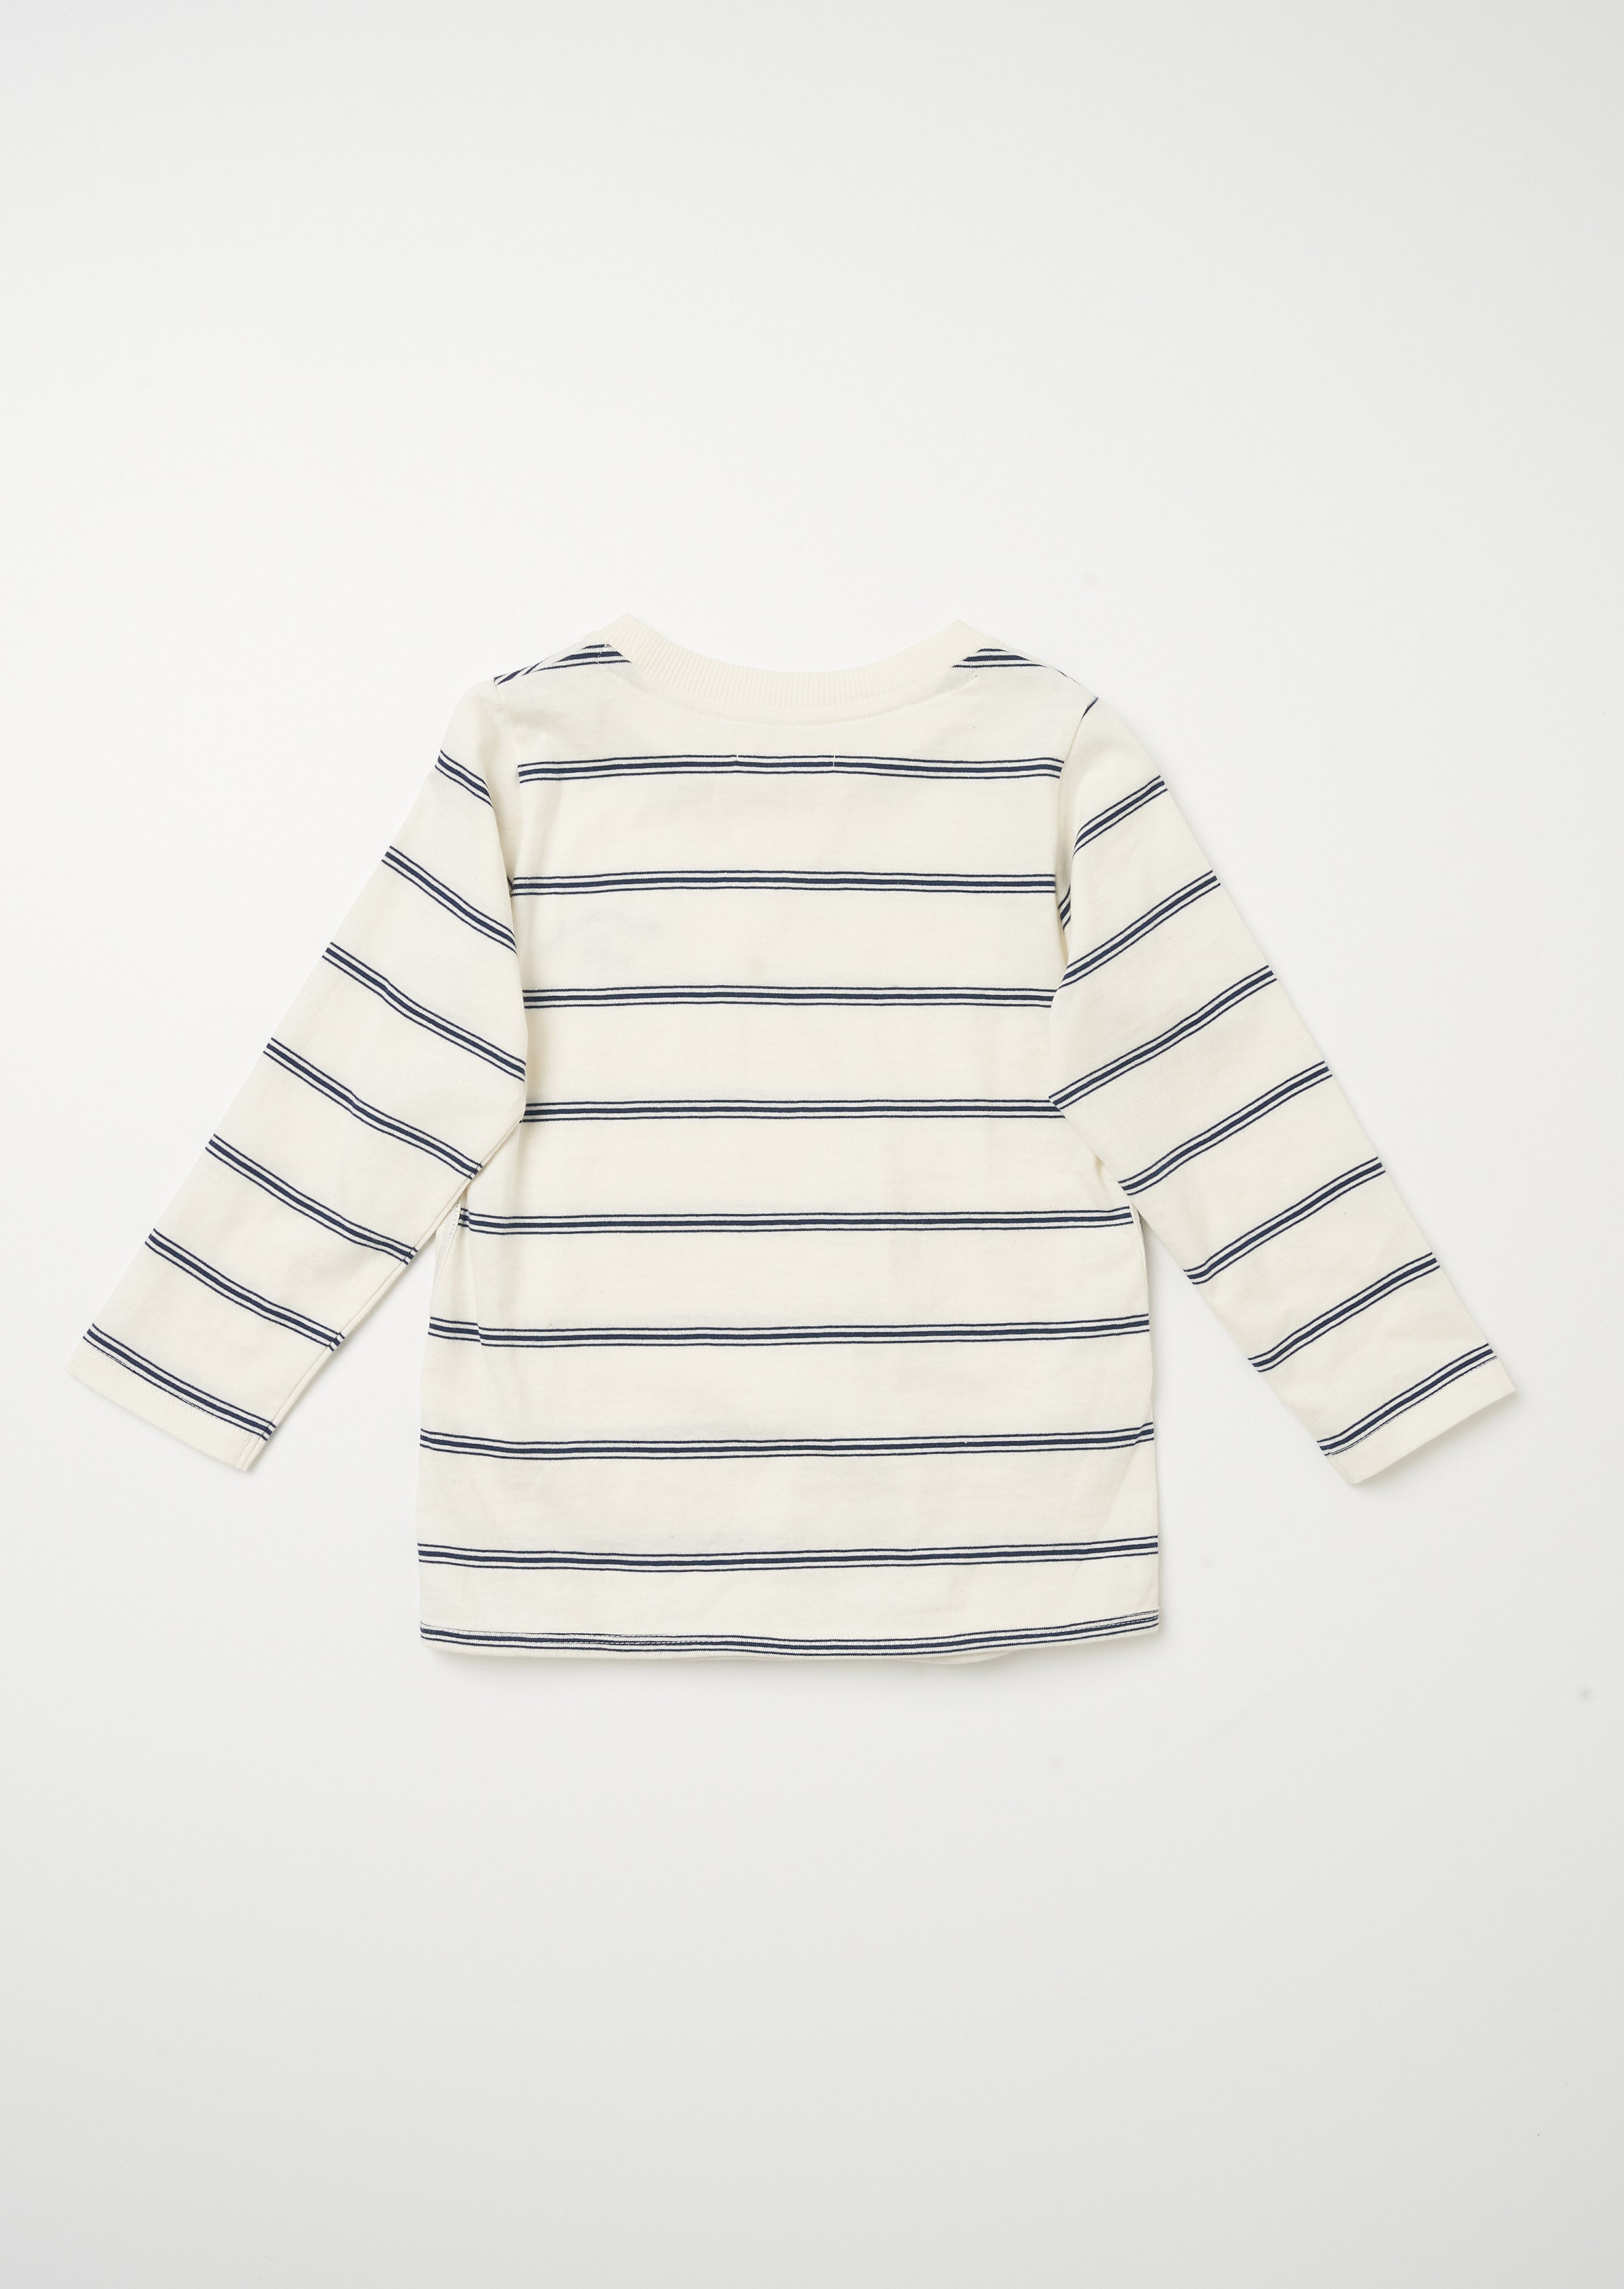 Baby Boy Cotton Striped Full Sleeves White T-Shirt